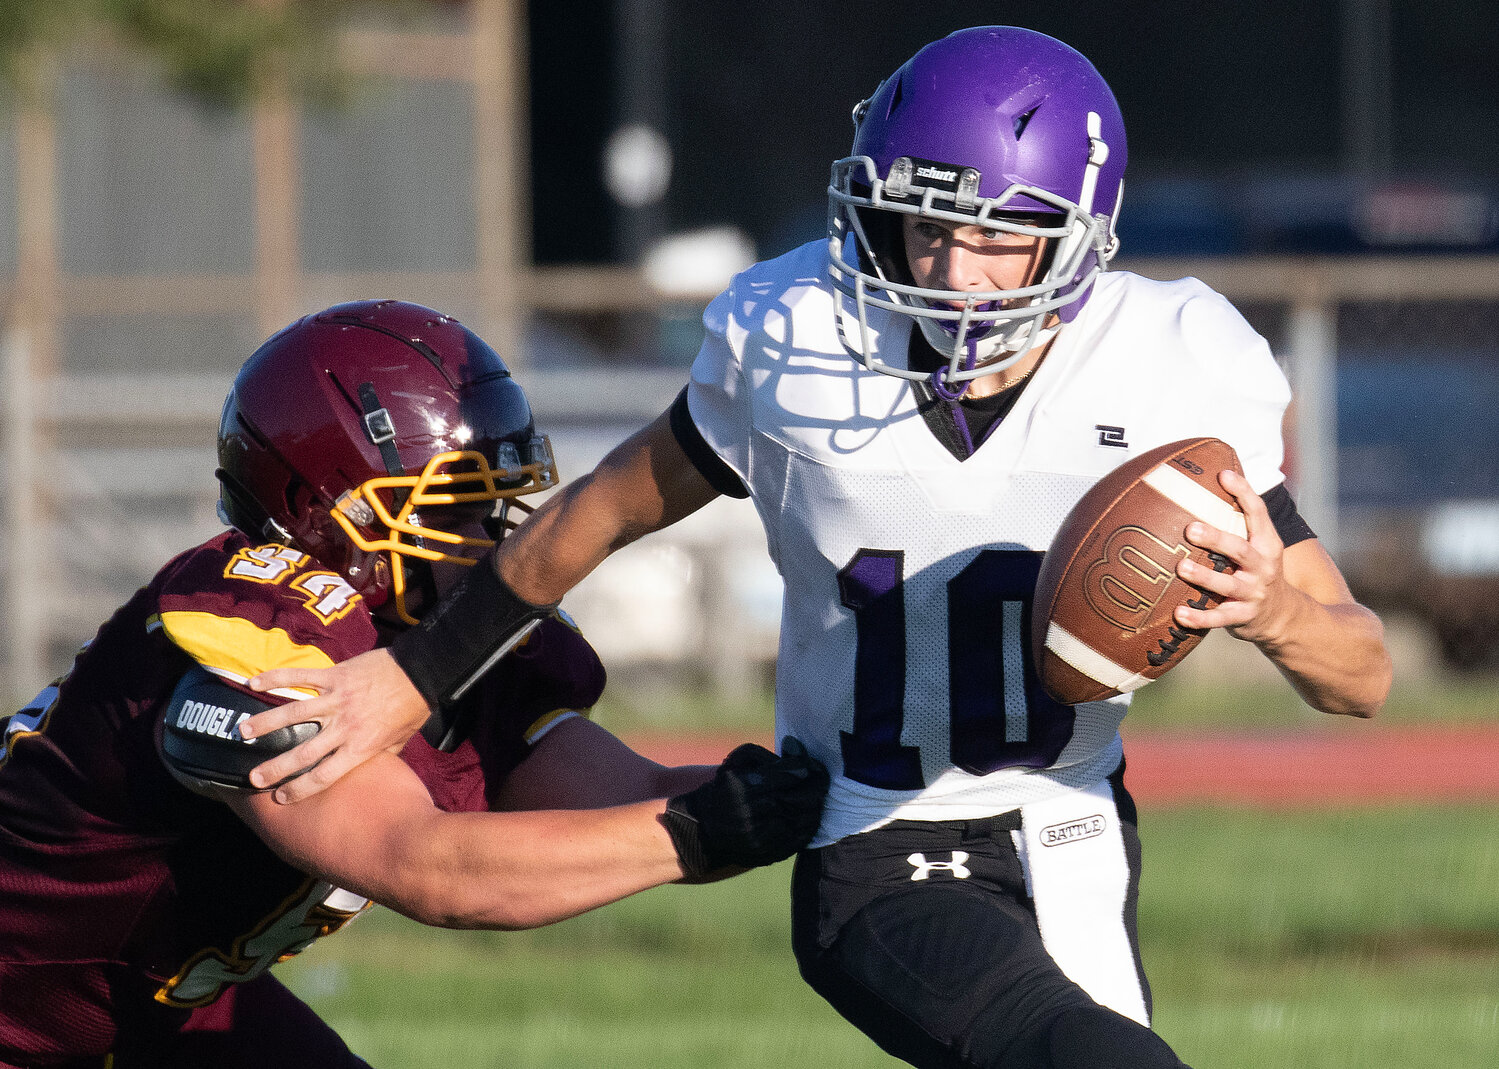 Mt. Hope's Ethan Martel looks for room to run during the Injury Fund game earlier this season.